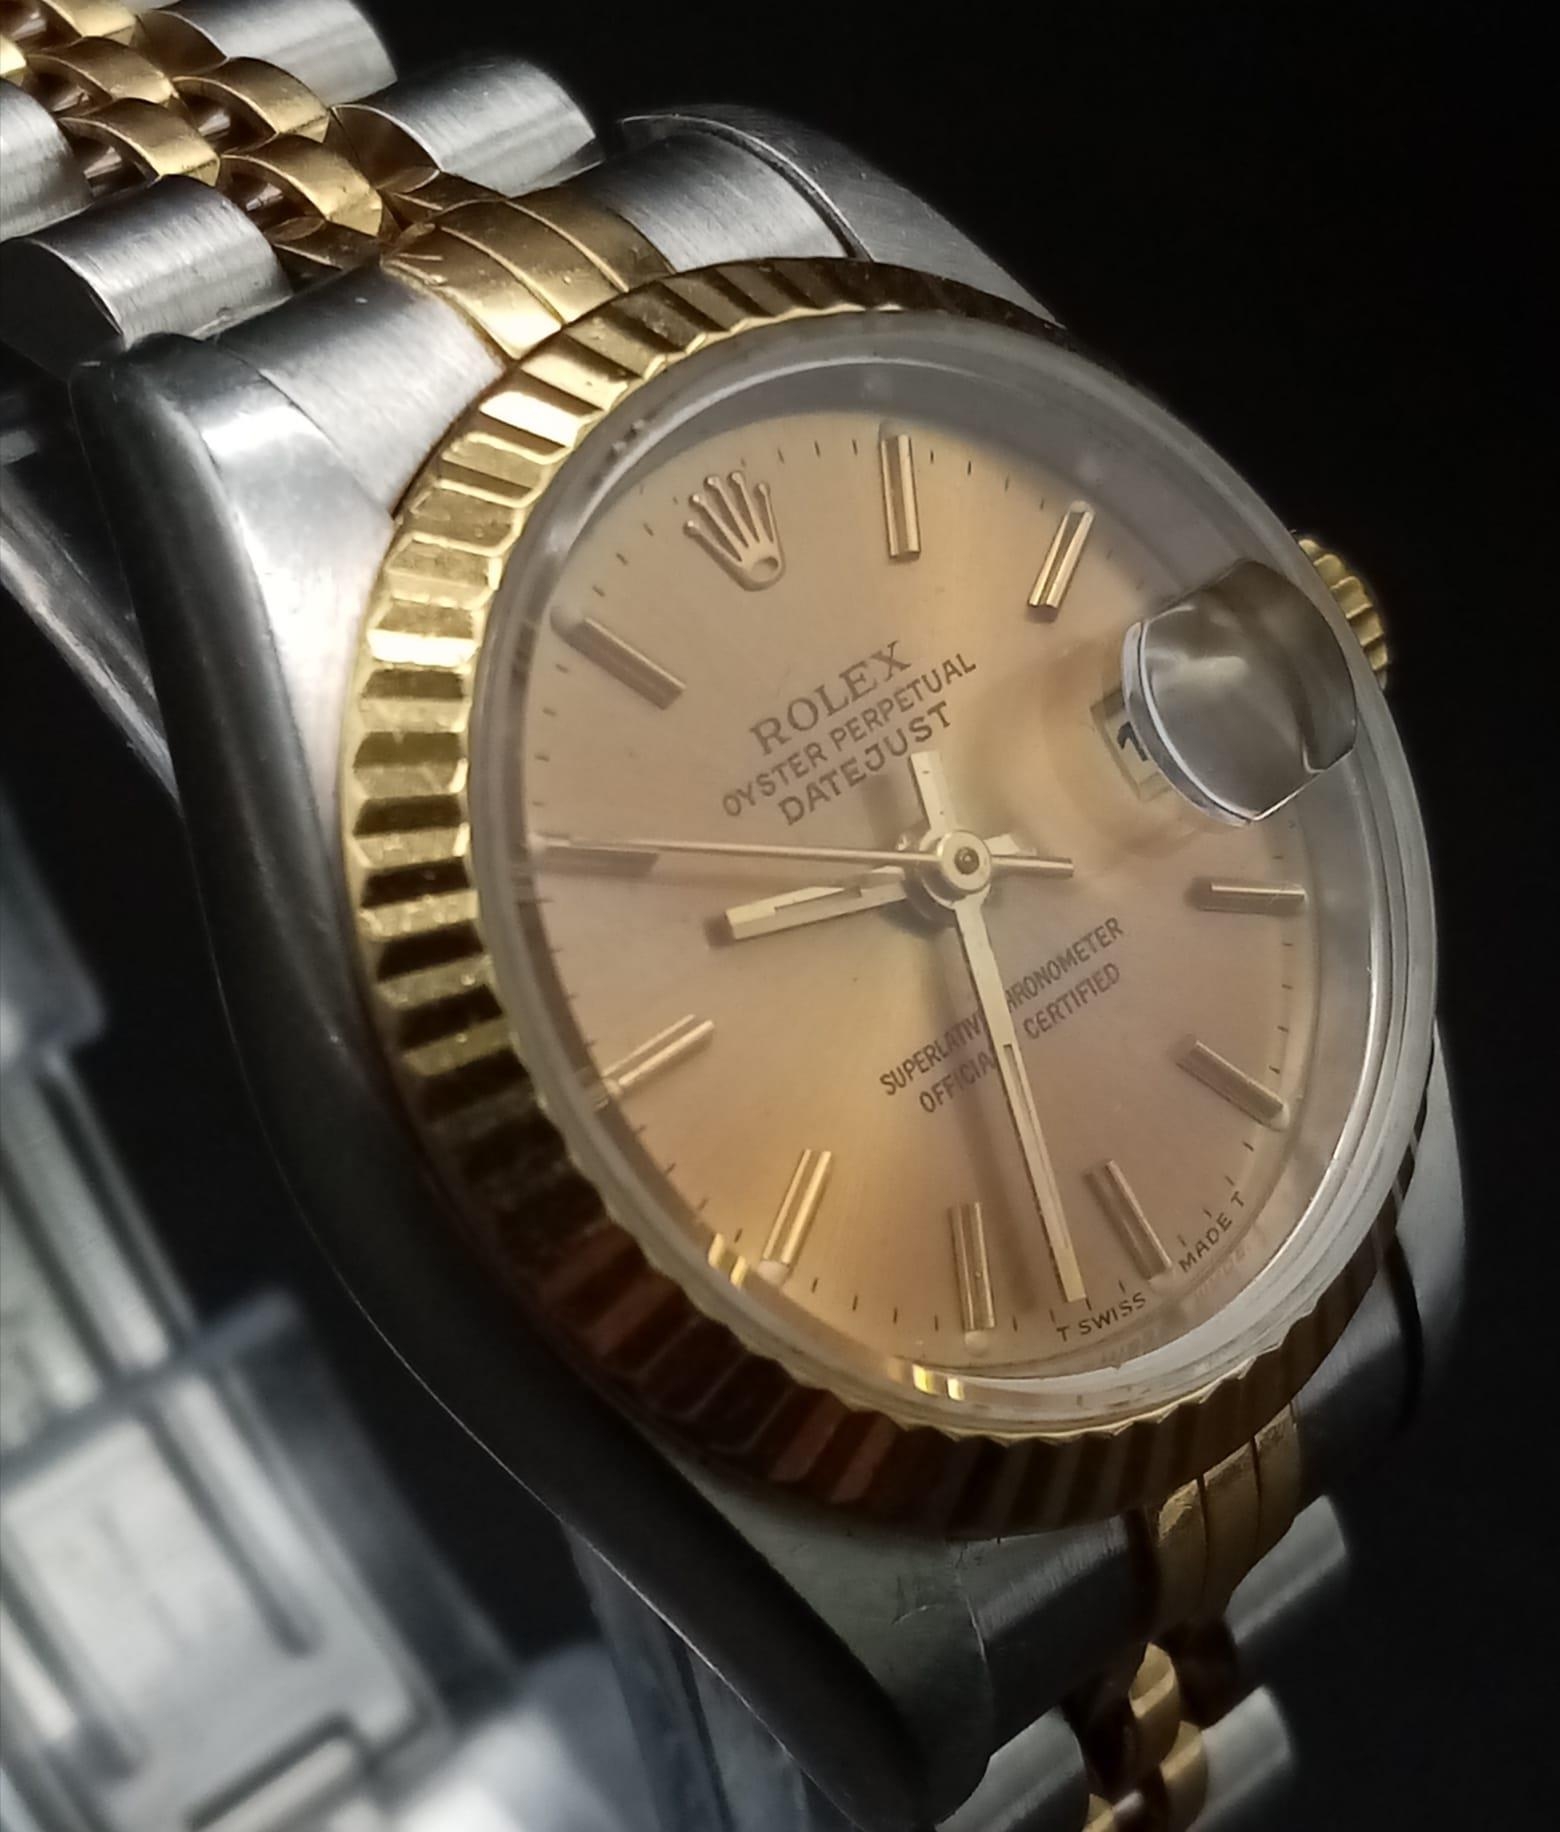 A Rolex Oyster Perpetual Datejust Ladies Watch. Bi-metal strap and case - 26mm. Gold tone dial - Image 4 of 13